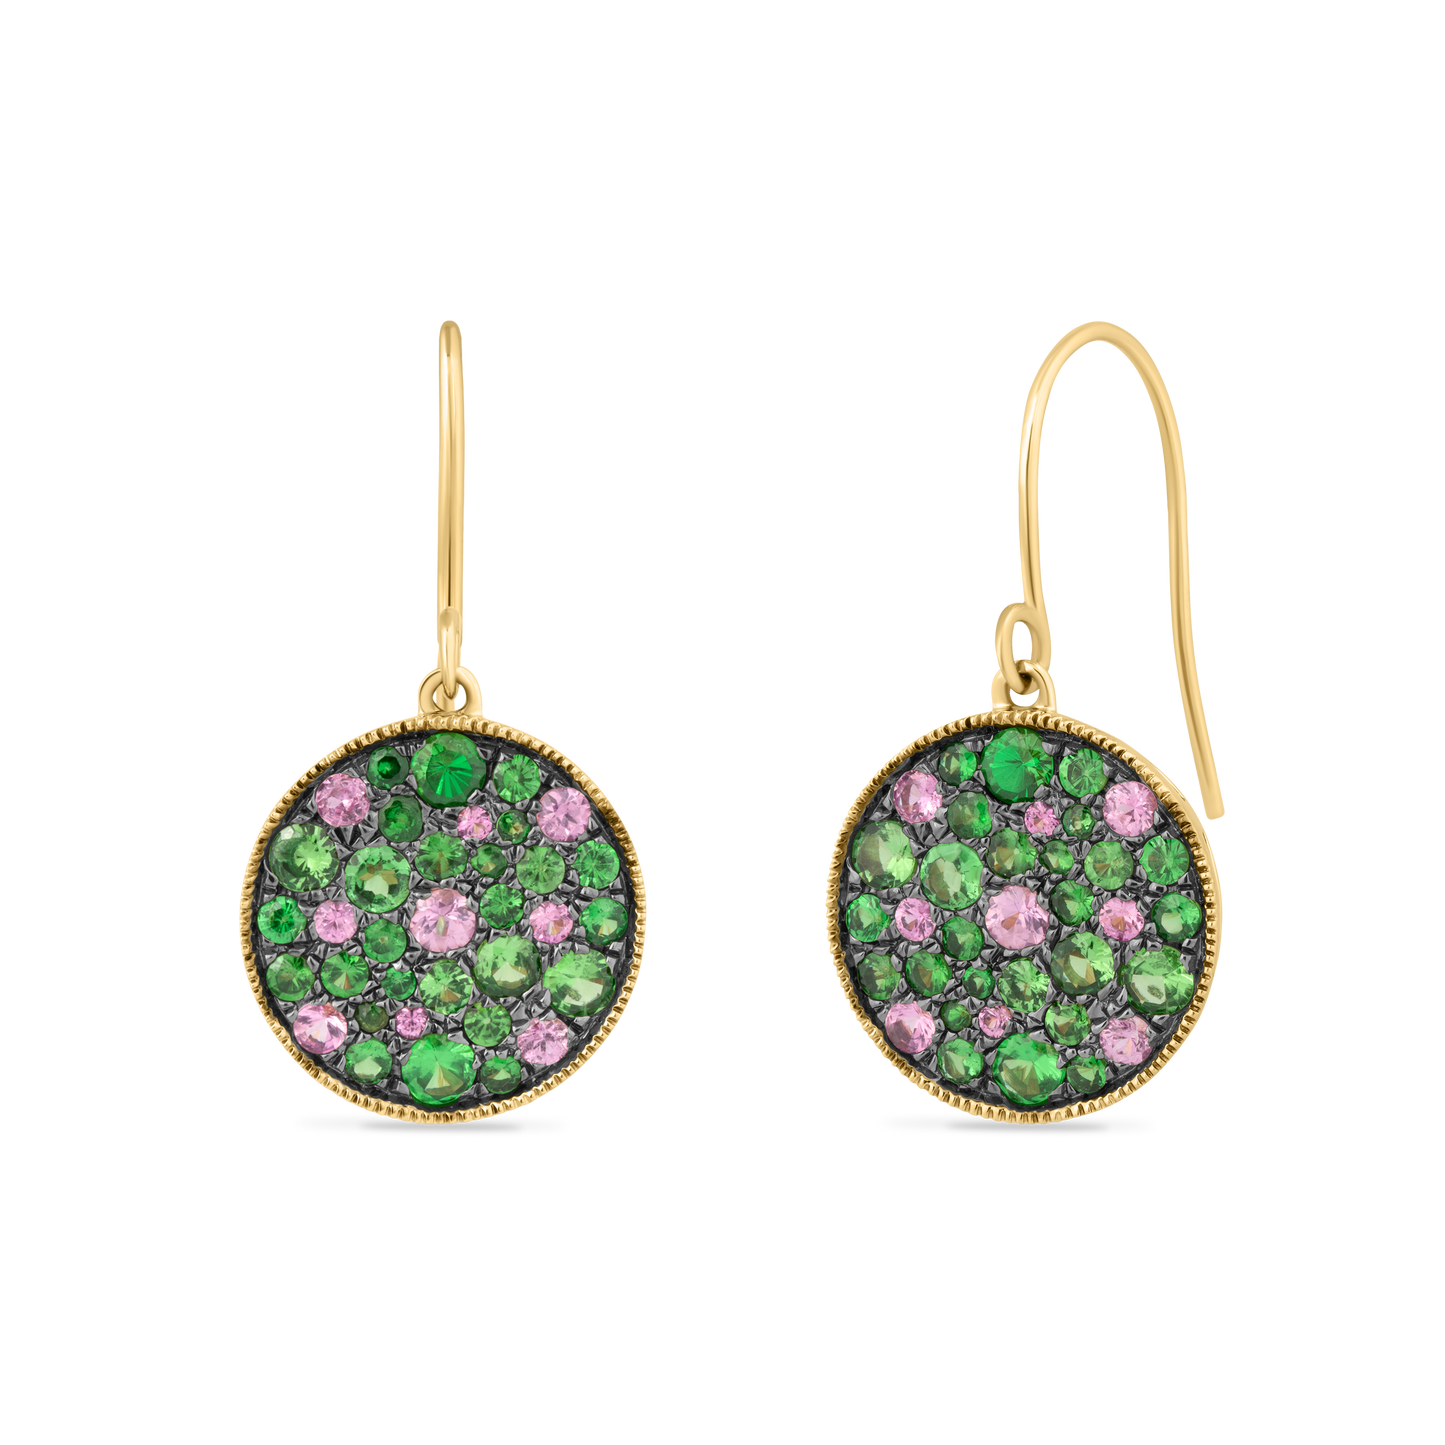 14K ROUND EARRINGS WITH 0.06CT GREEN GARNET AND 0.48CT PINK SAPPHIRES